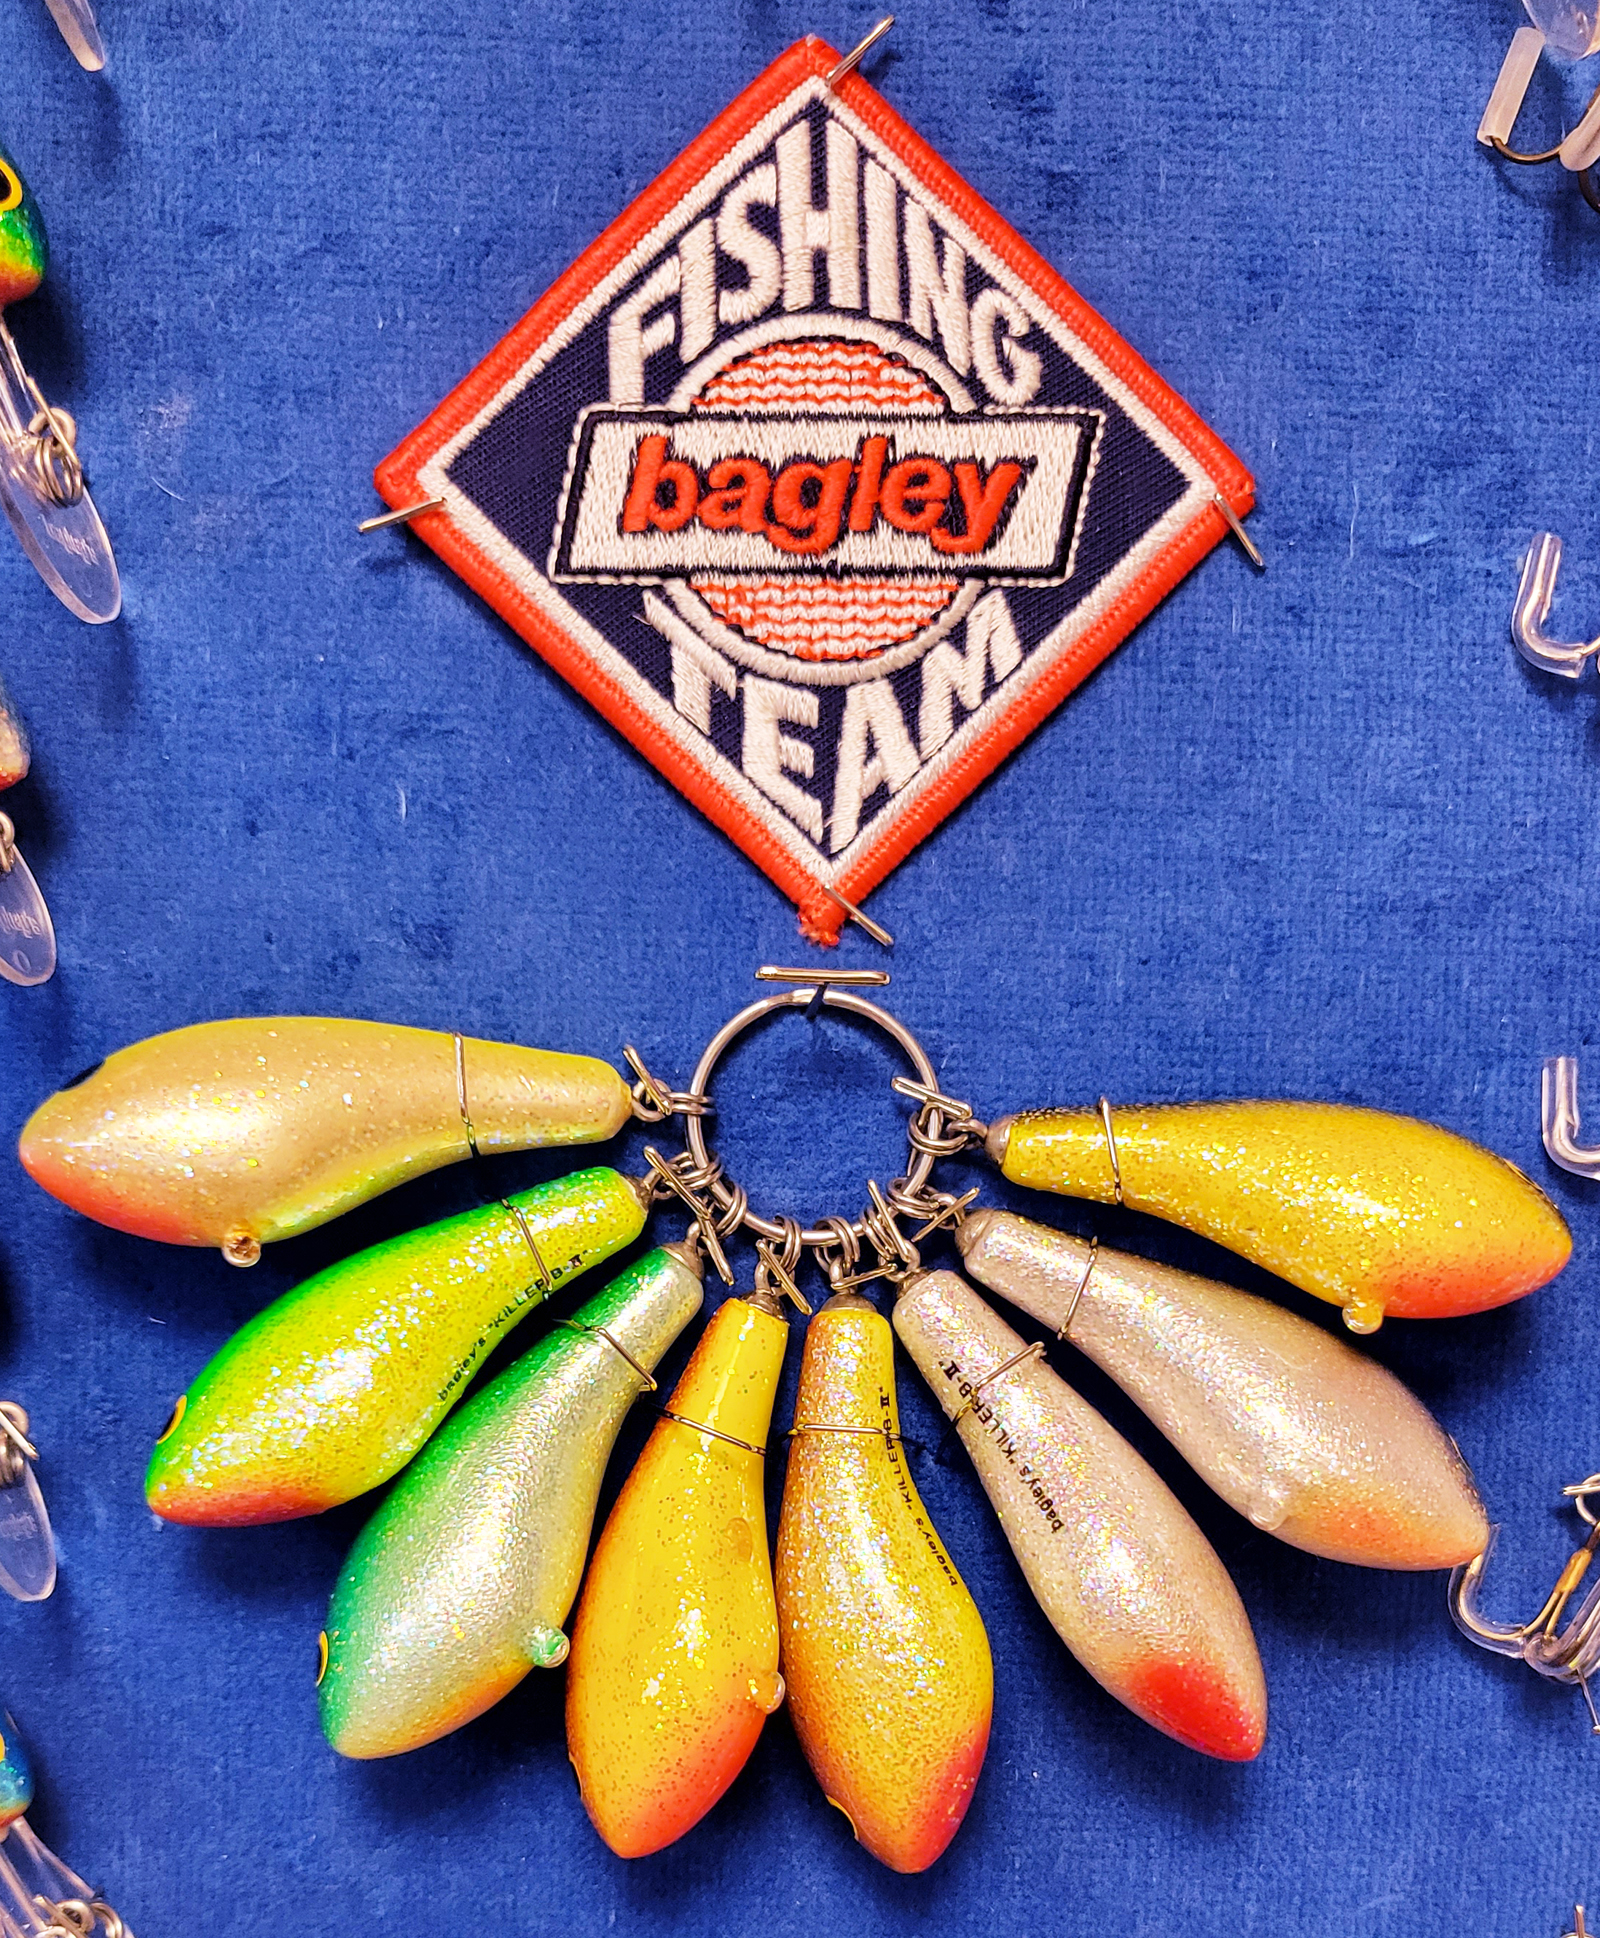 Bagley Baits - LIKE and TAG a friend for your chance to win a